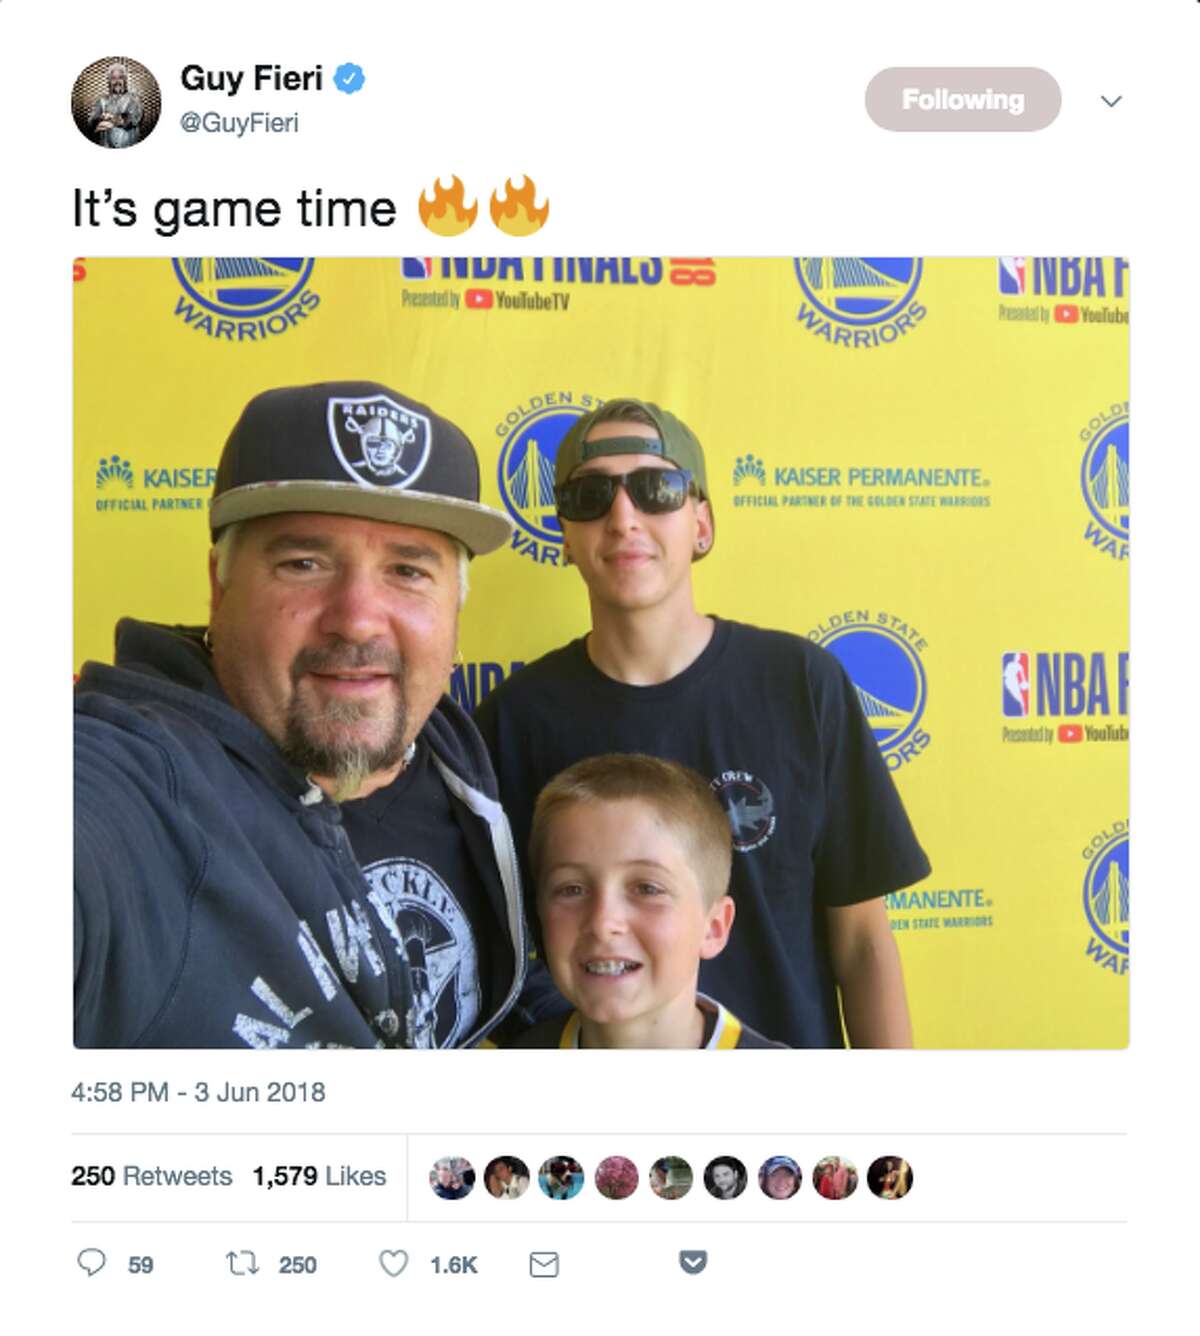 Celebrity chef and "Diners, Drive-Ins and Dives" host Guy Fieri with family at Oracle Arena for Game 2.